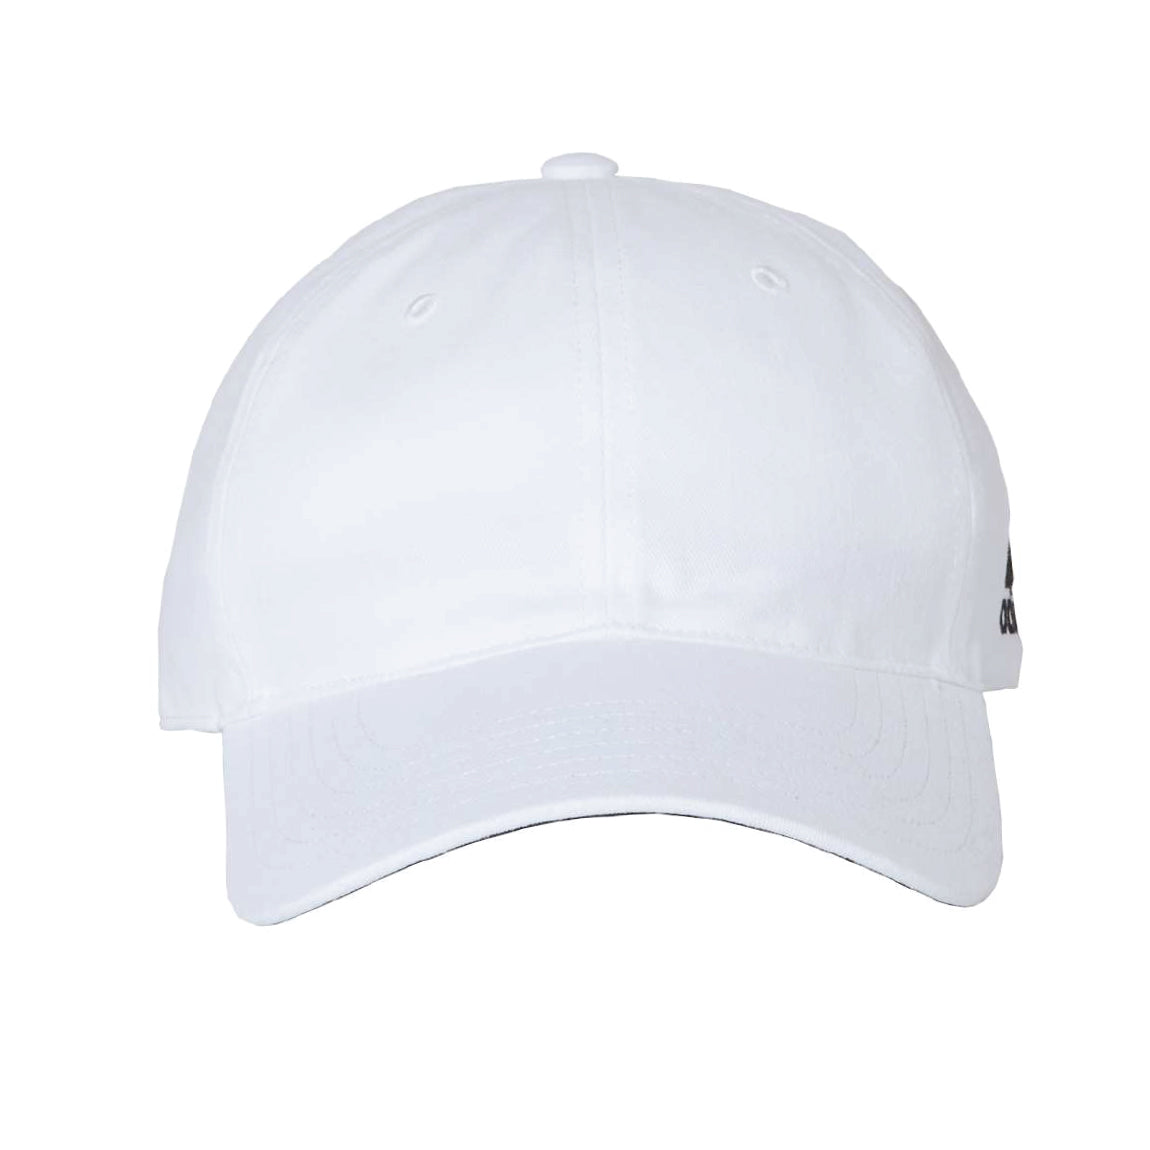 Core Performance Relaxed Cap